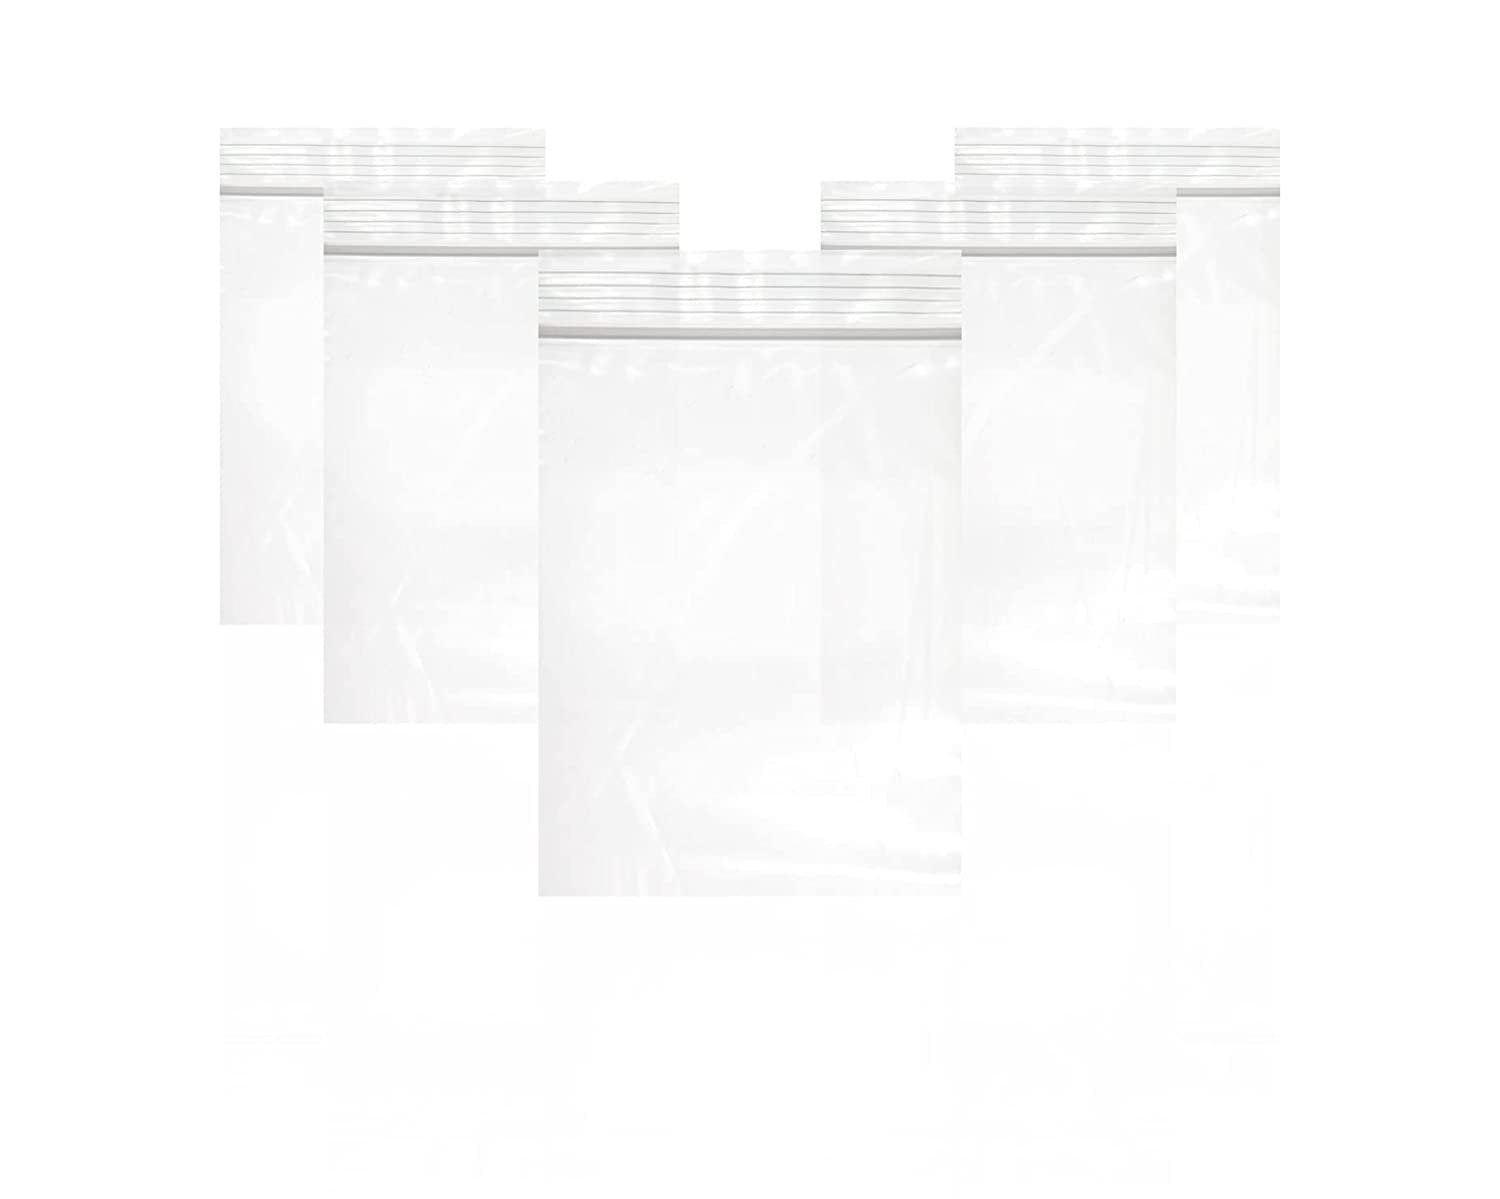 6x9 Clear Poly Bags 4x6 100 Each Size 8x10 Small Combo Pack of 400 Plastic Packaging Bags - Small Clear Bags for Packaging Extra Strong Seal 5x7 